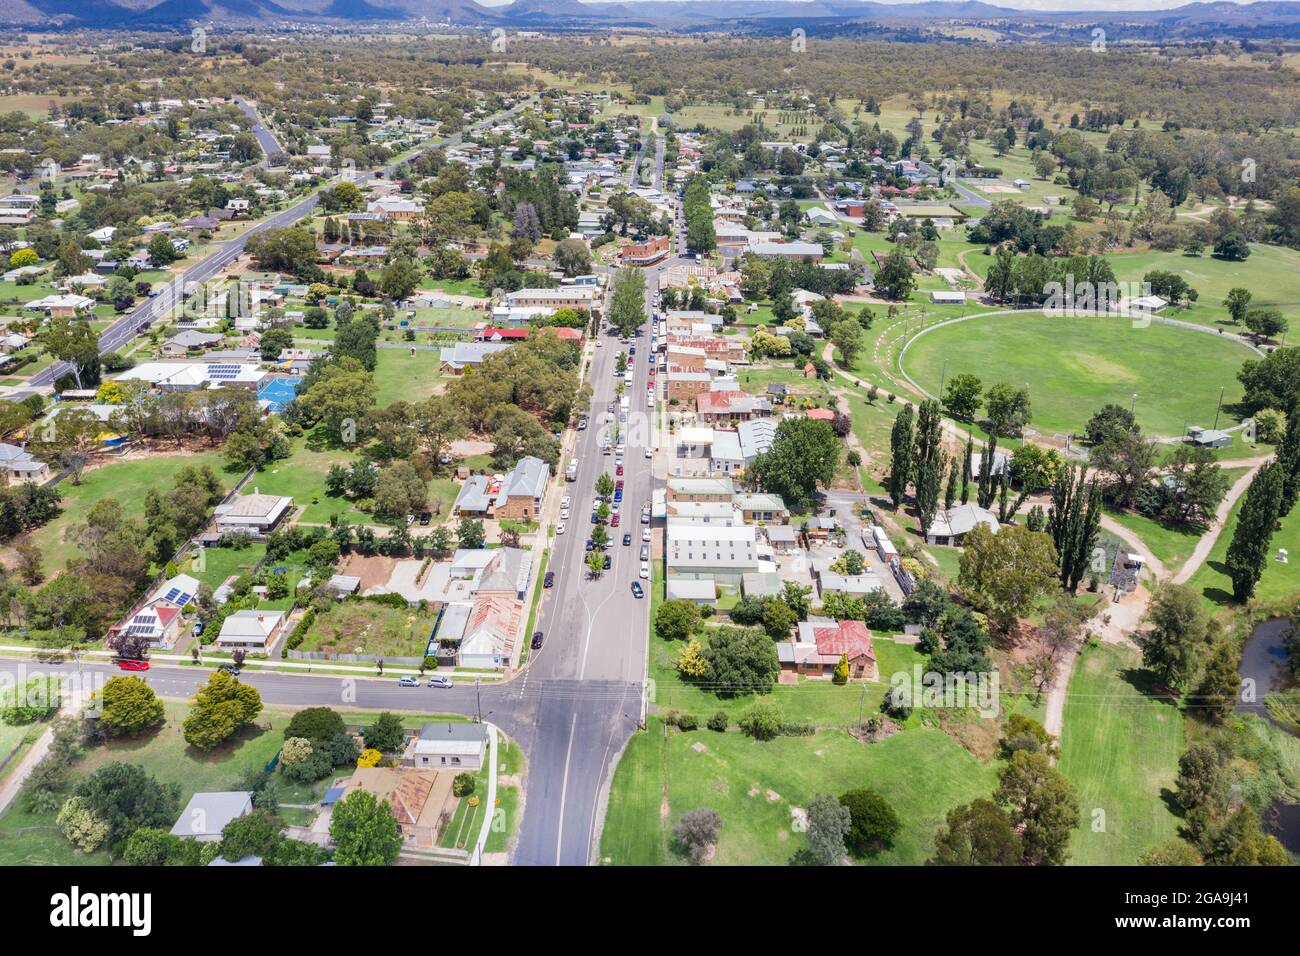 Rylstone is a small rural town in the central west of NSW located on the Bylong Valley way, it is a popular stop for people touring in the area. Stock Photo